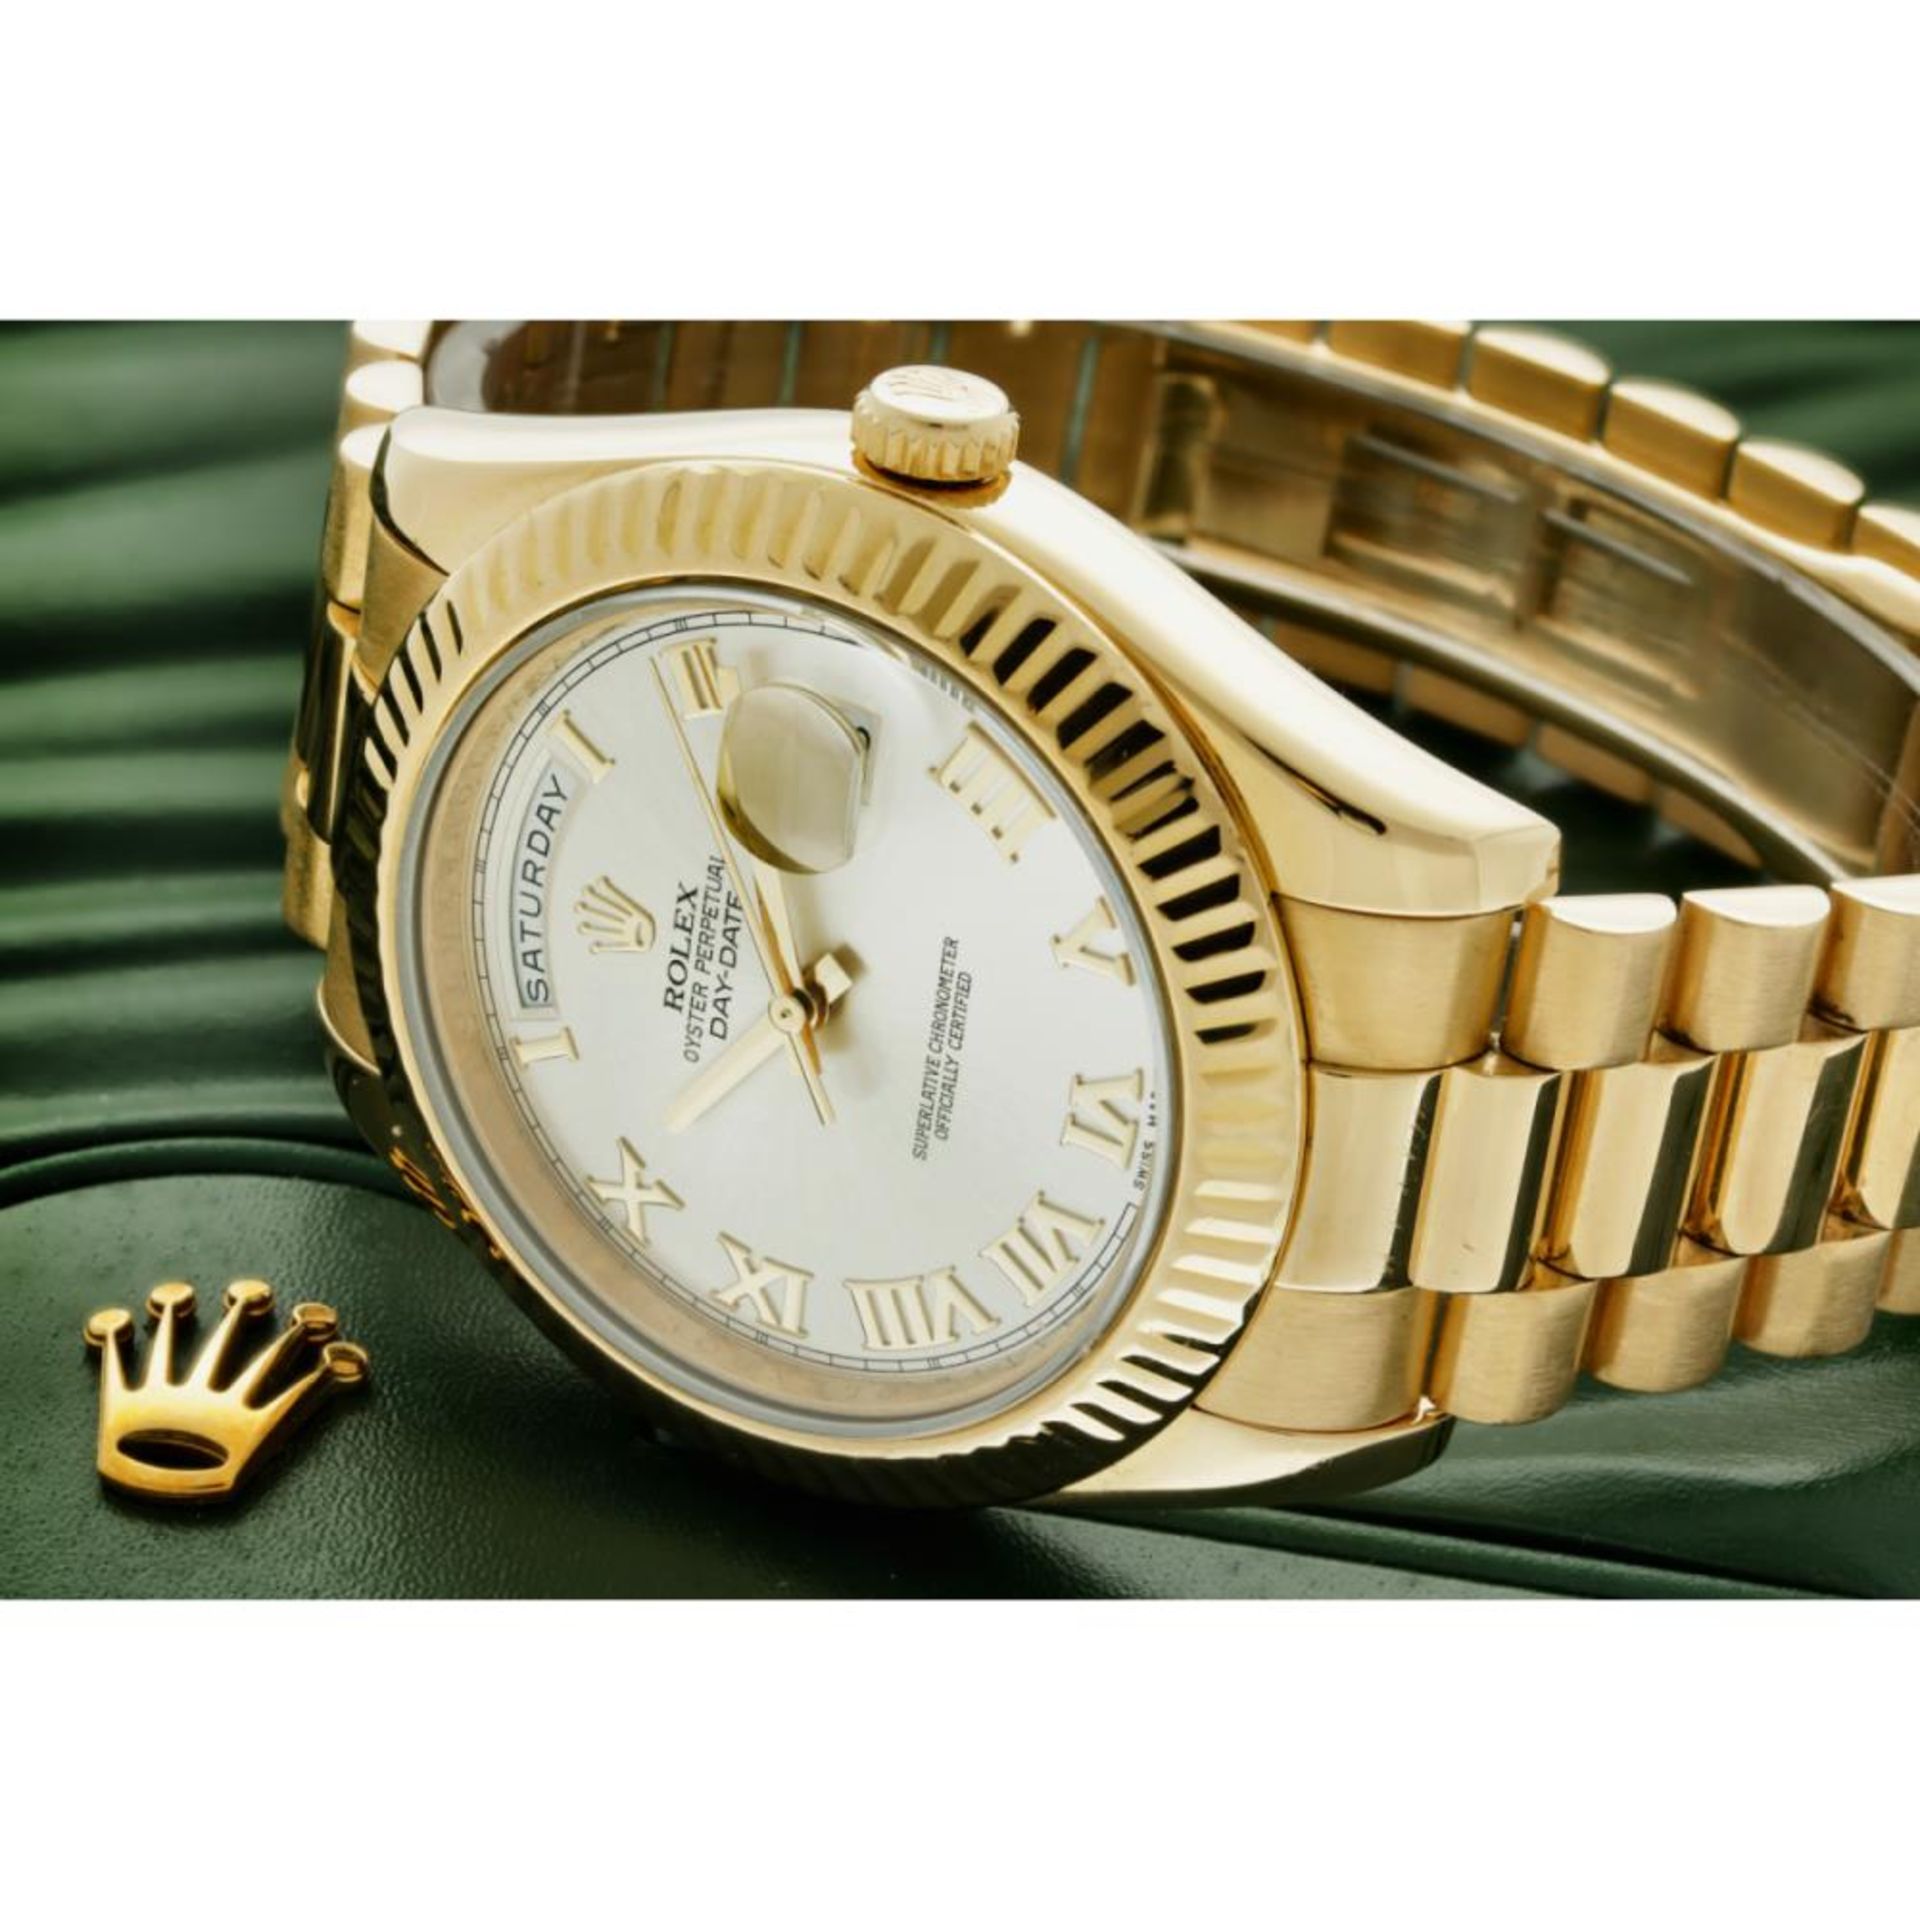 Rolex Day-Date 218238 - Men's watch - apprx. 2011. - Image 6 of 9